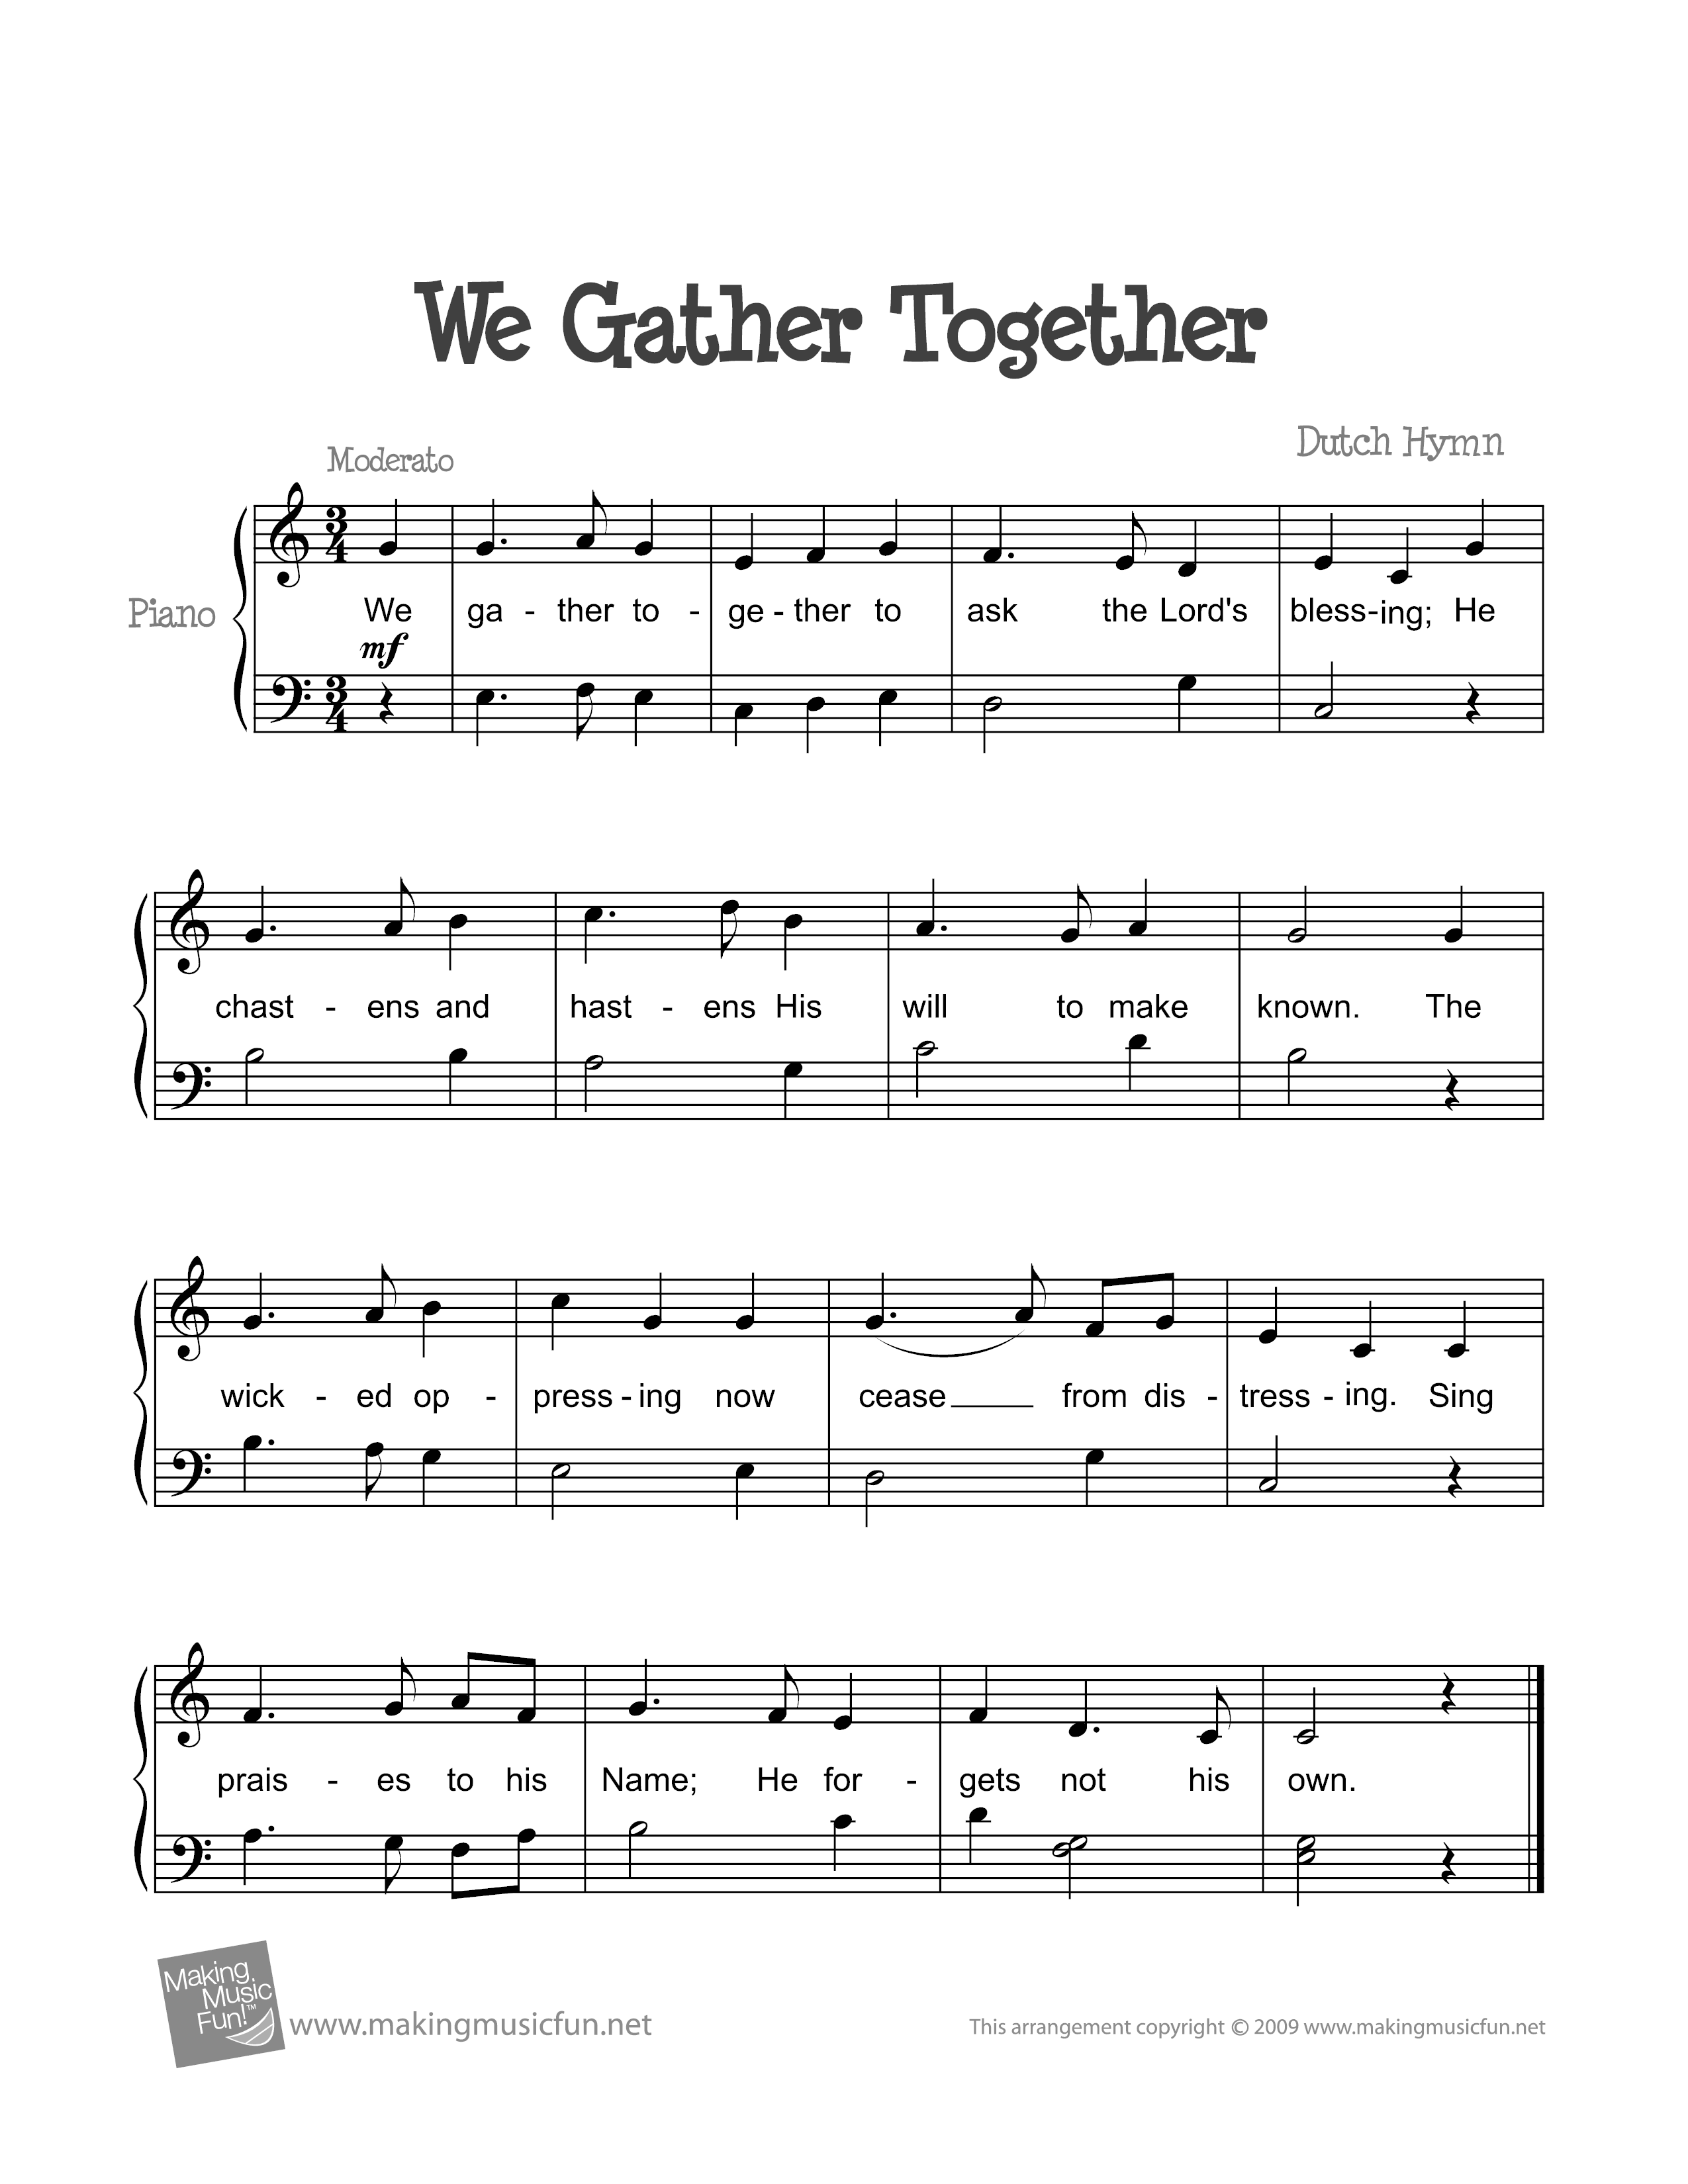 We Gather Together Score